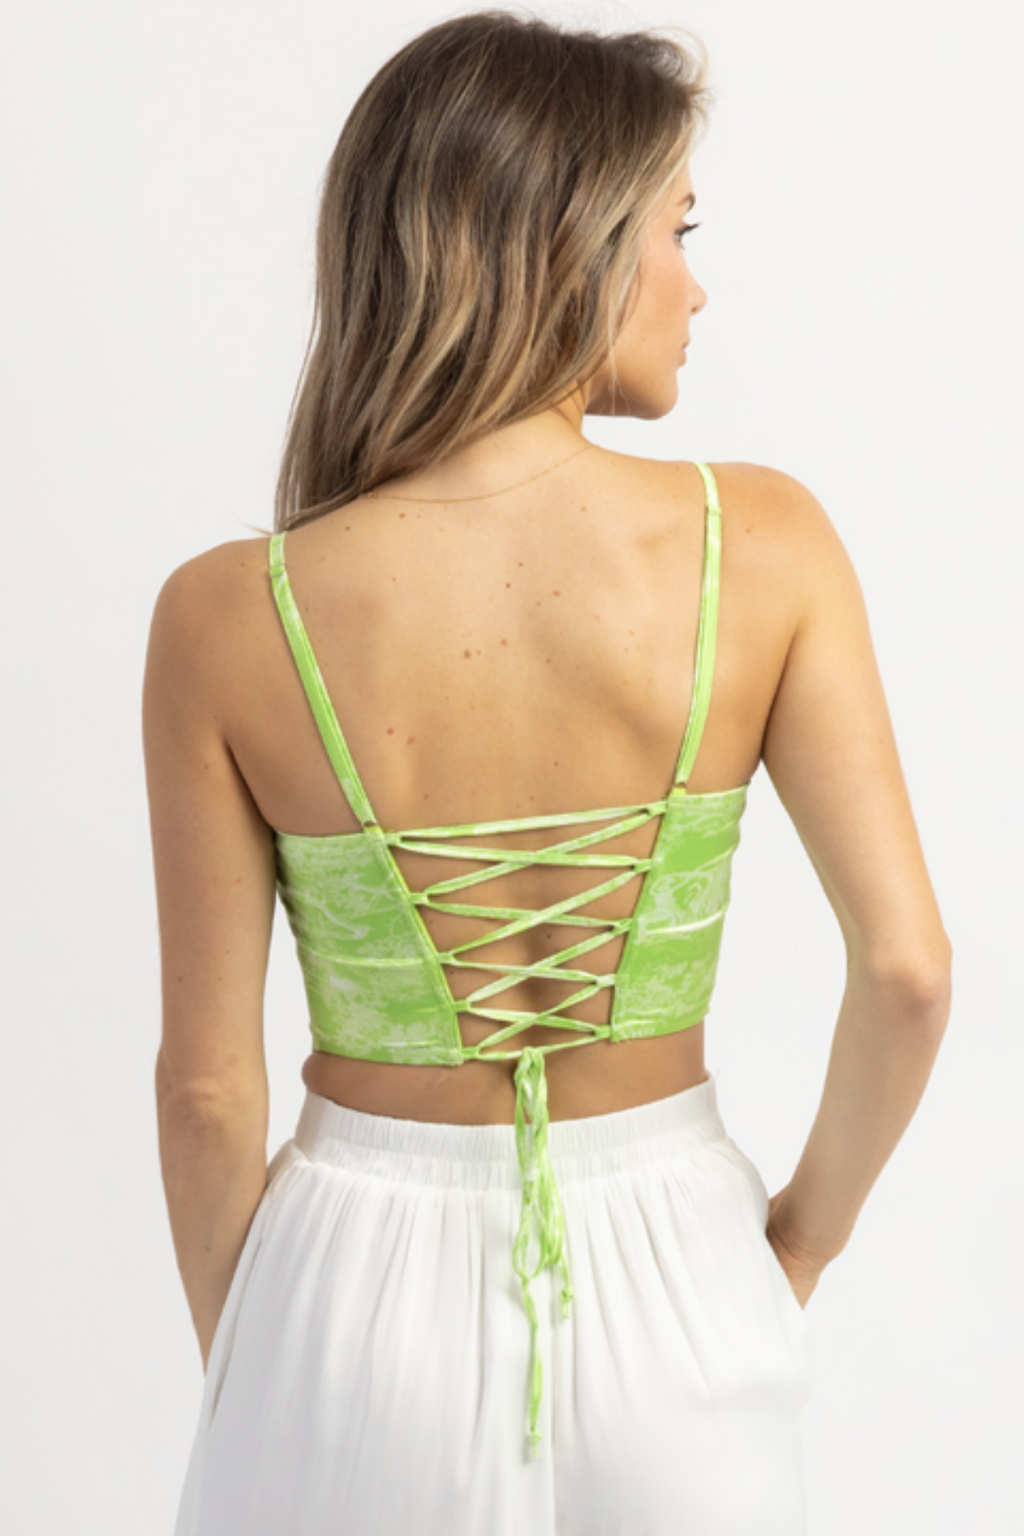 BALI LIME TIE BACK CROP TOP *BACK IN STOCK*